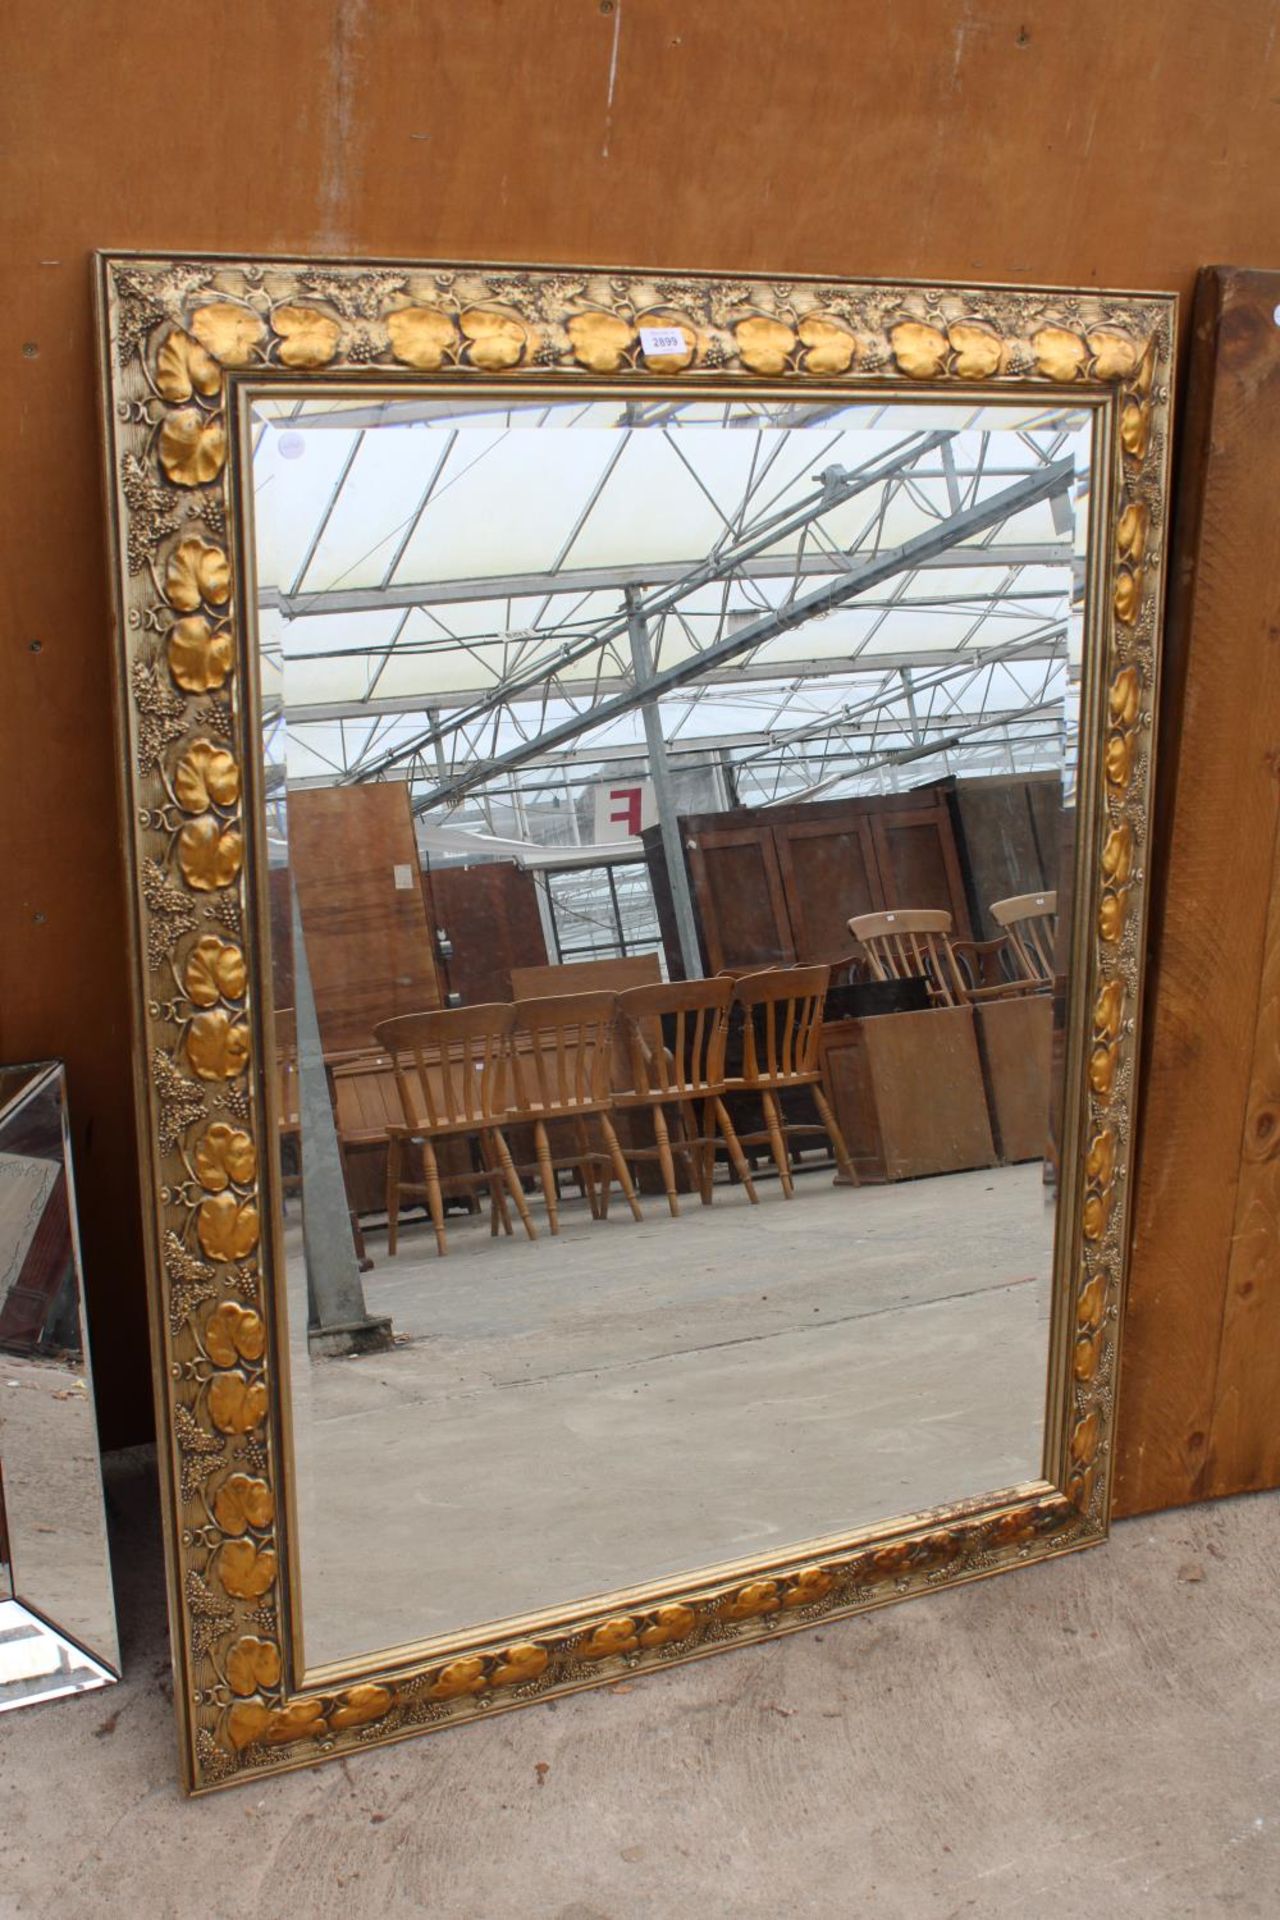 A MODERN GILT FRAMED WALL MIRROR WITH BEVEL EDGE AND FOLIATE DECORATION, 48" X 37"